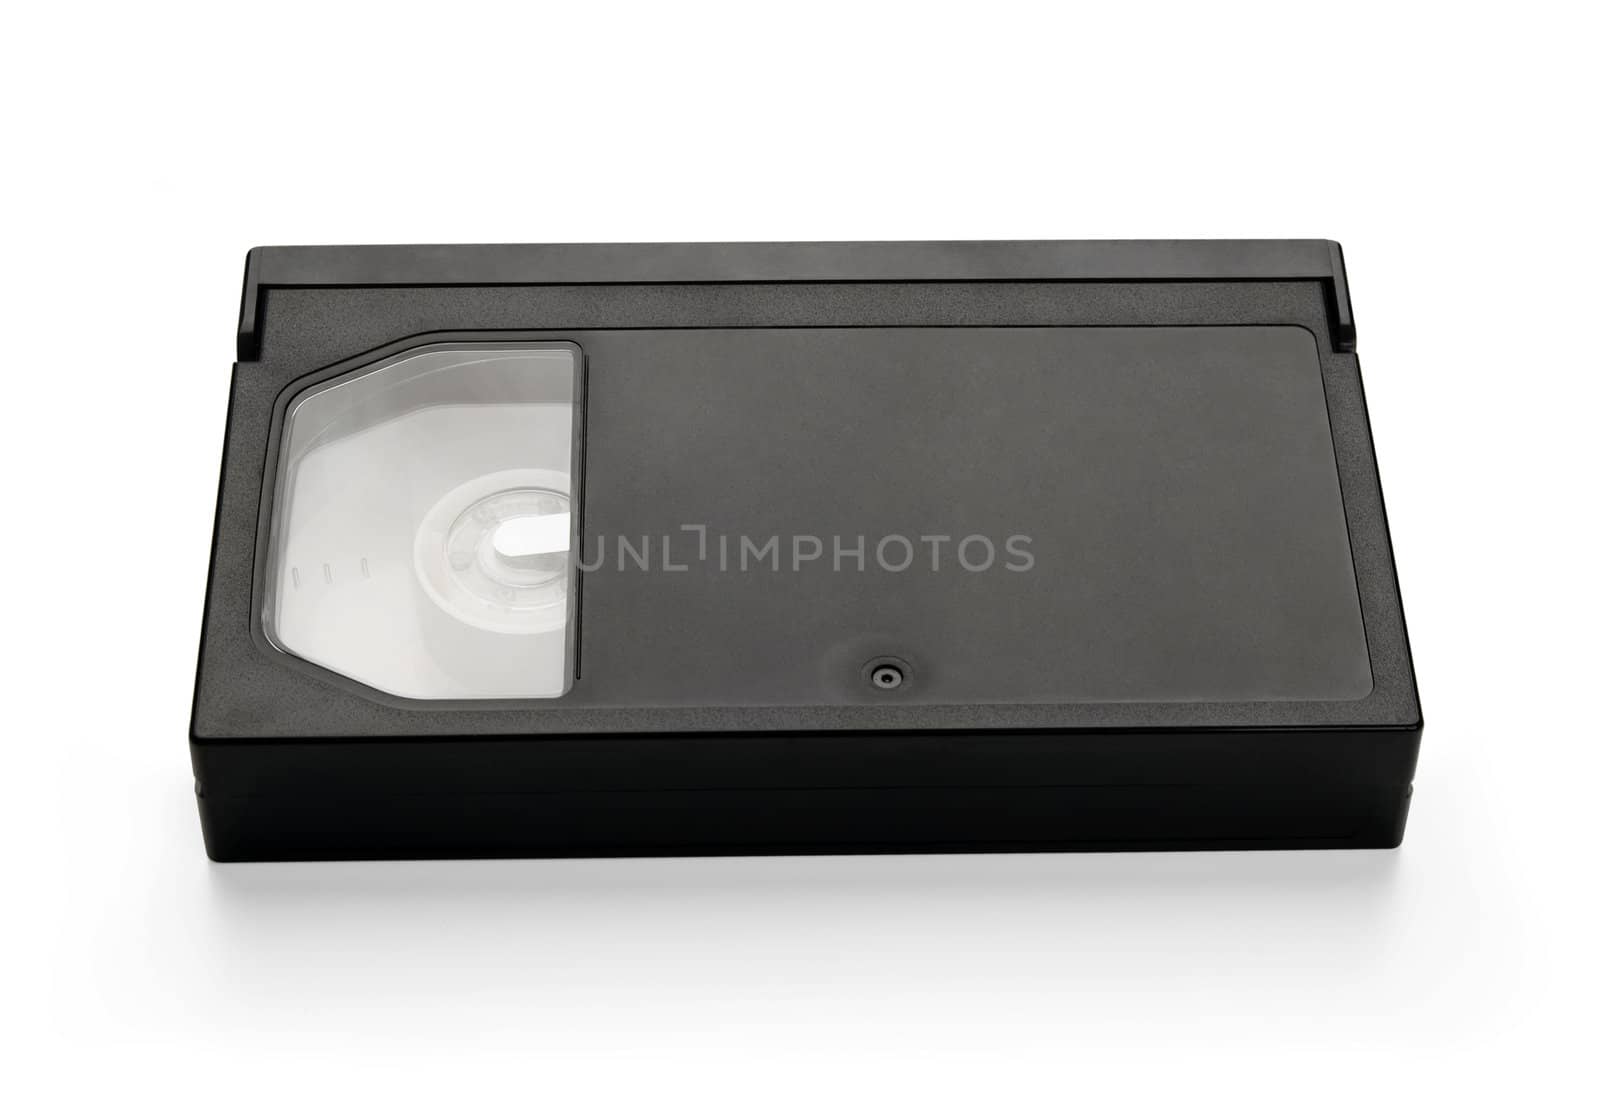 Video cassette, isolated on white background.